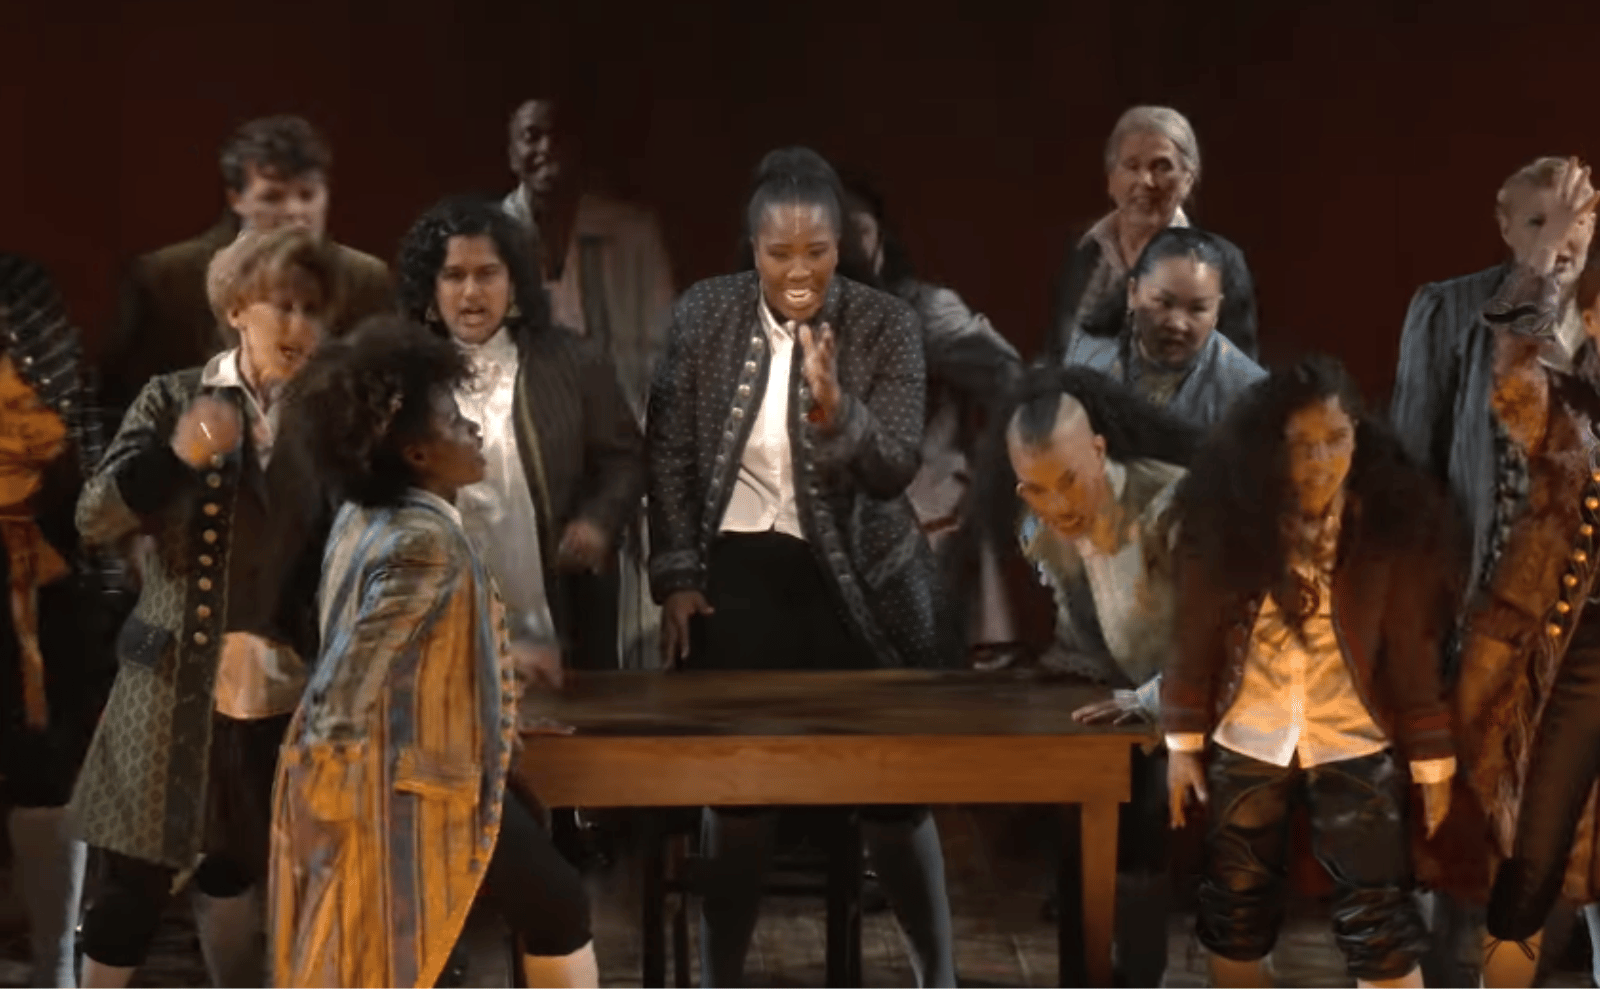 Iconic Broadway musical 1776 returns with women, trans and non-binary actors as US founding fathers